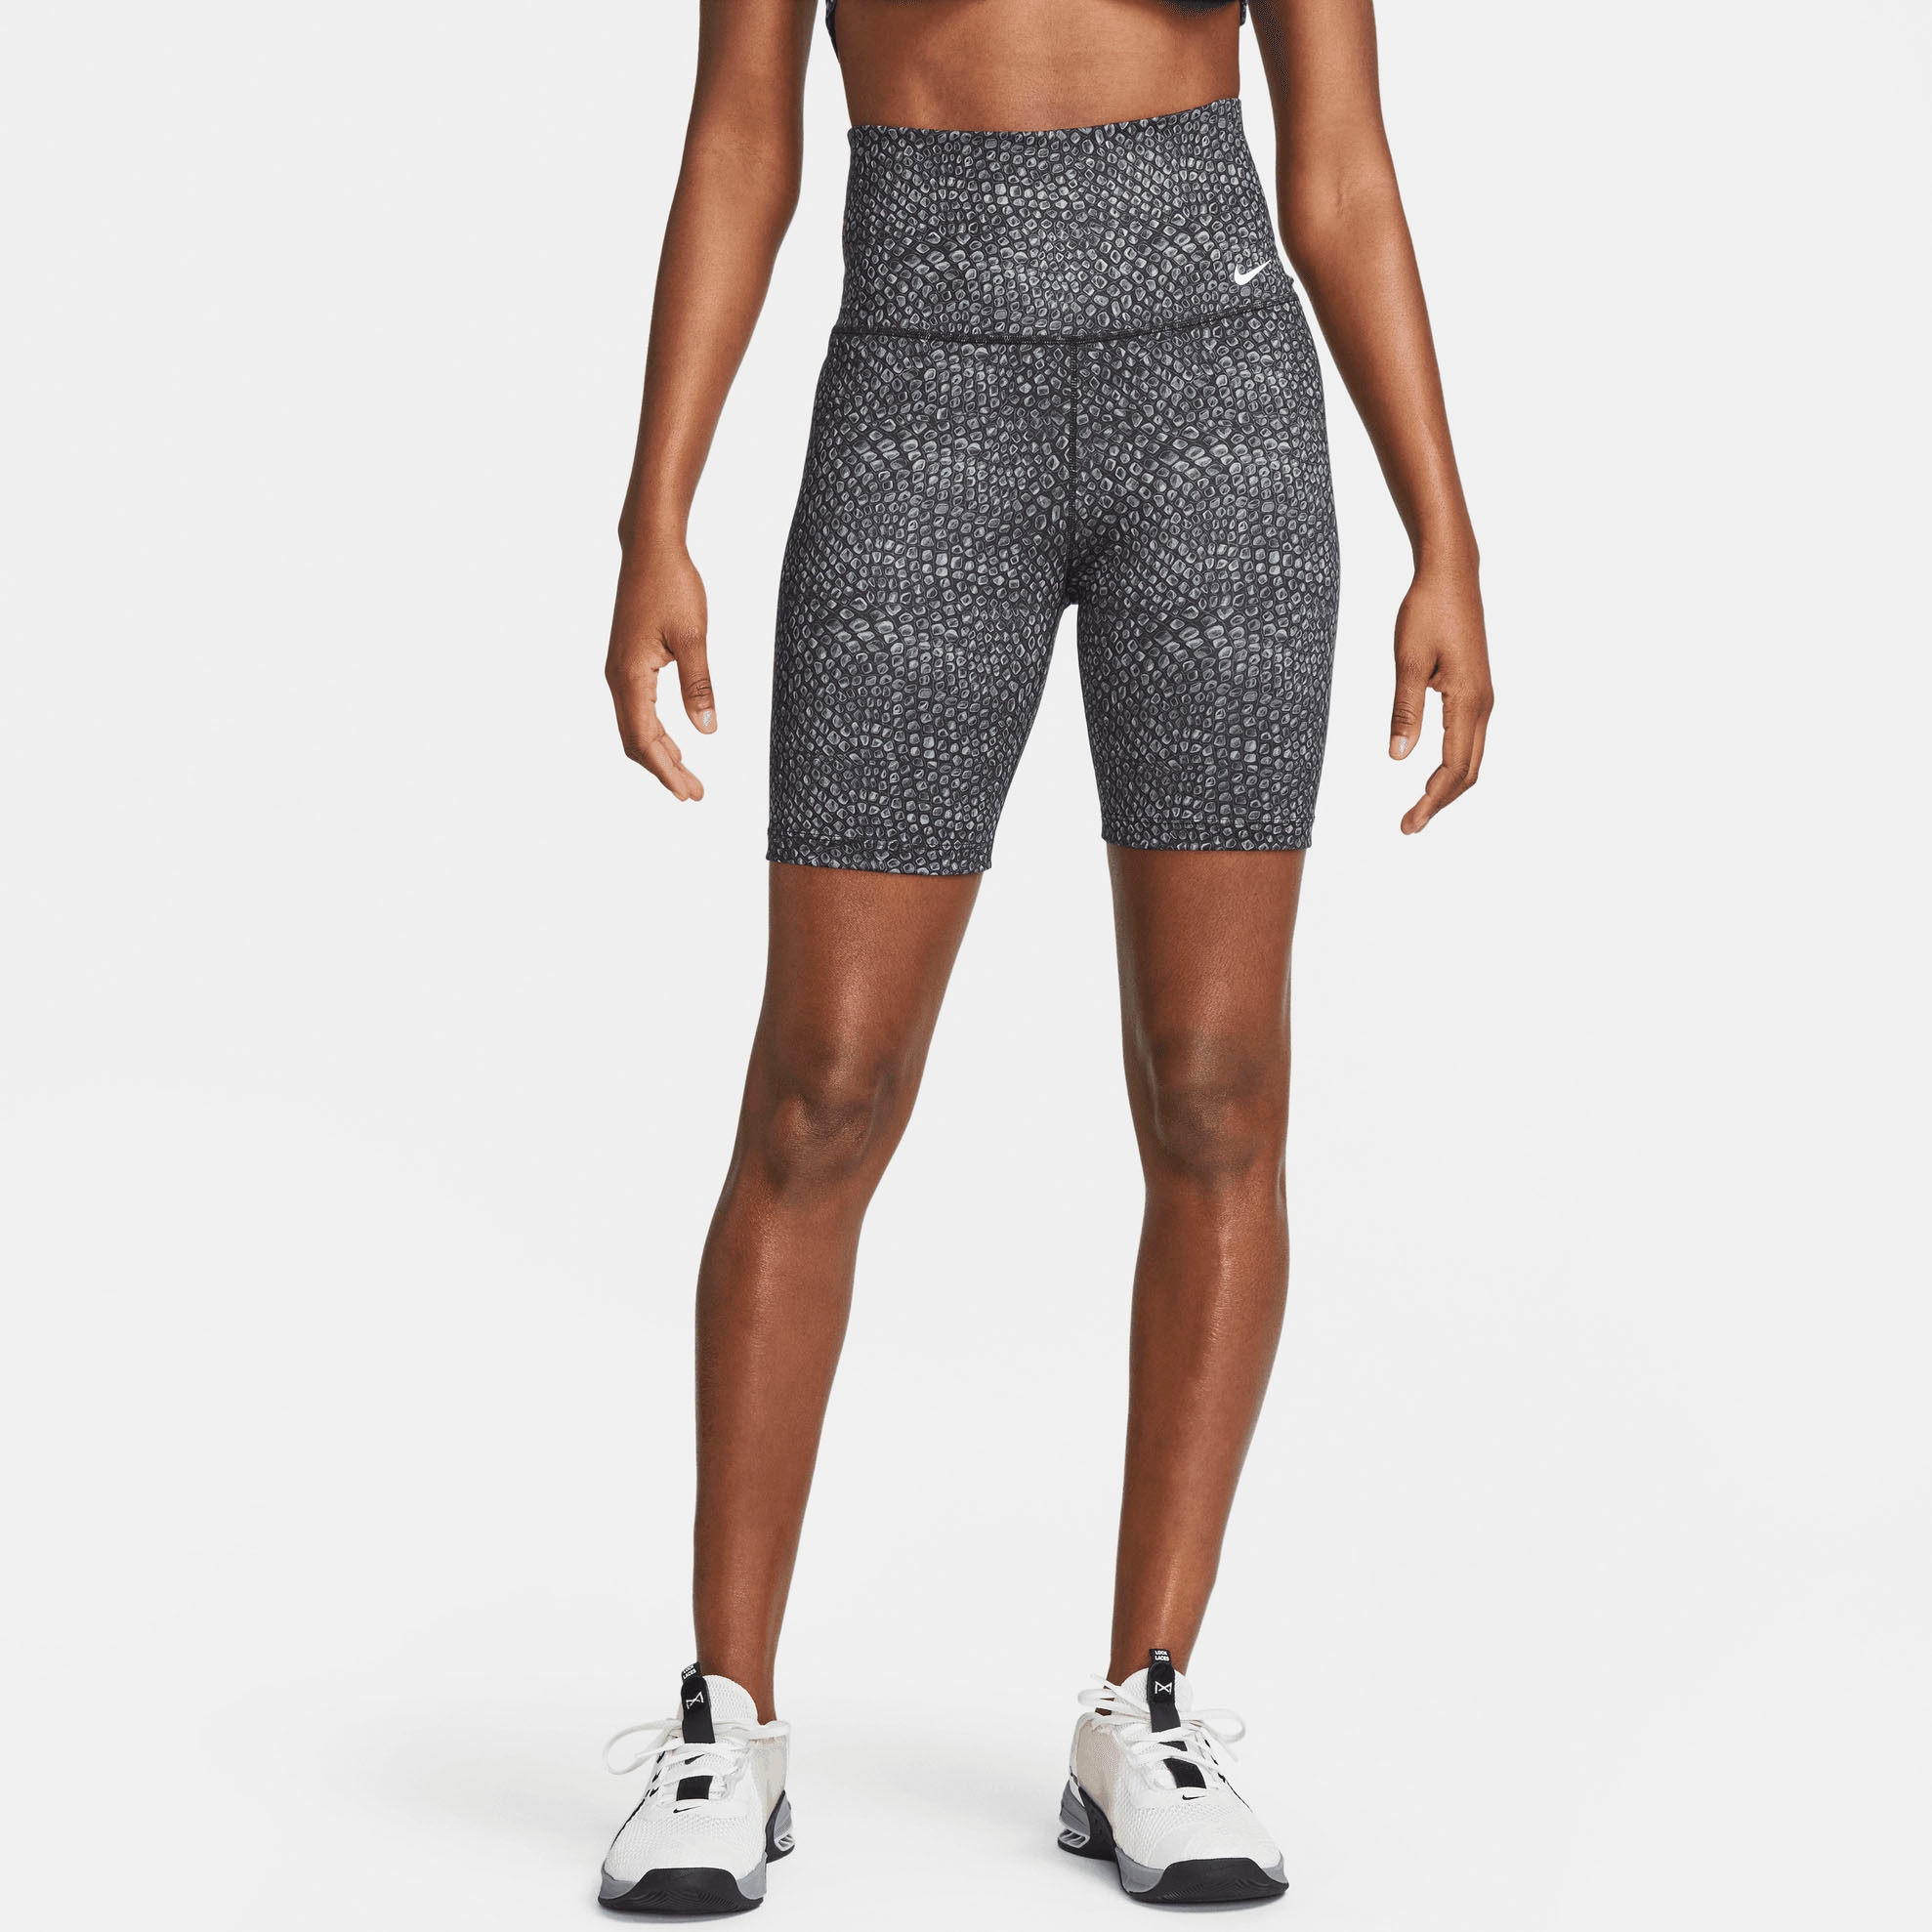 Trainingstights »One Dri-FIT Women's Mid-Rise " All-Over-Print Shorts«